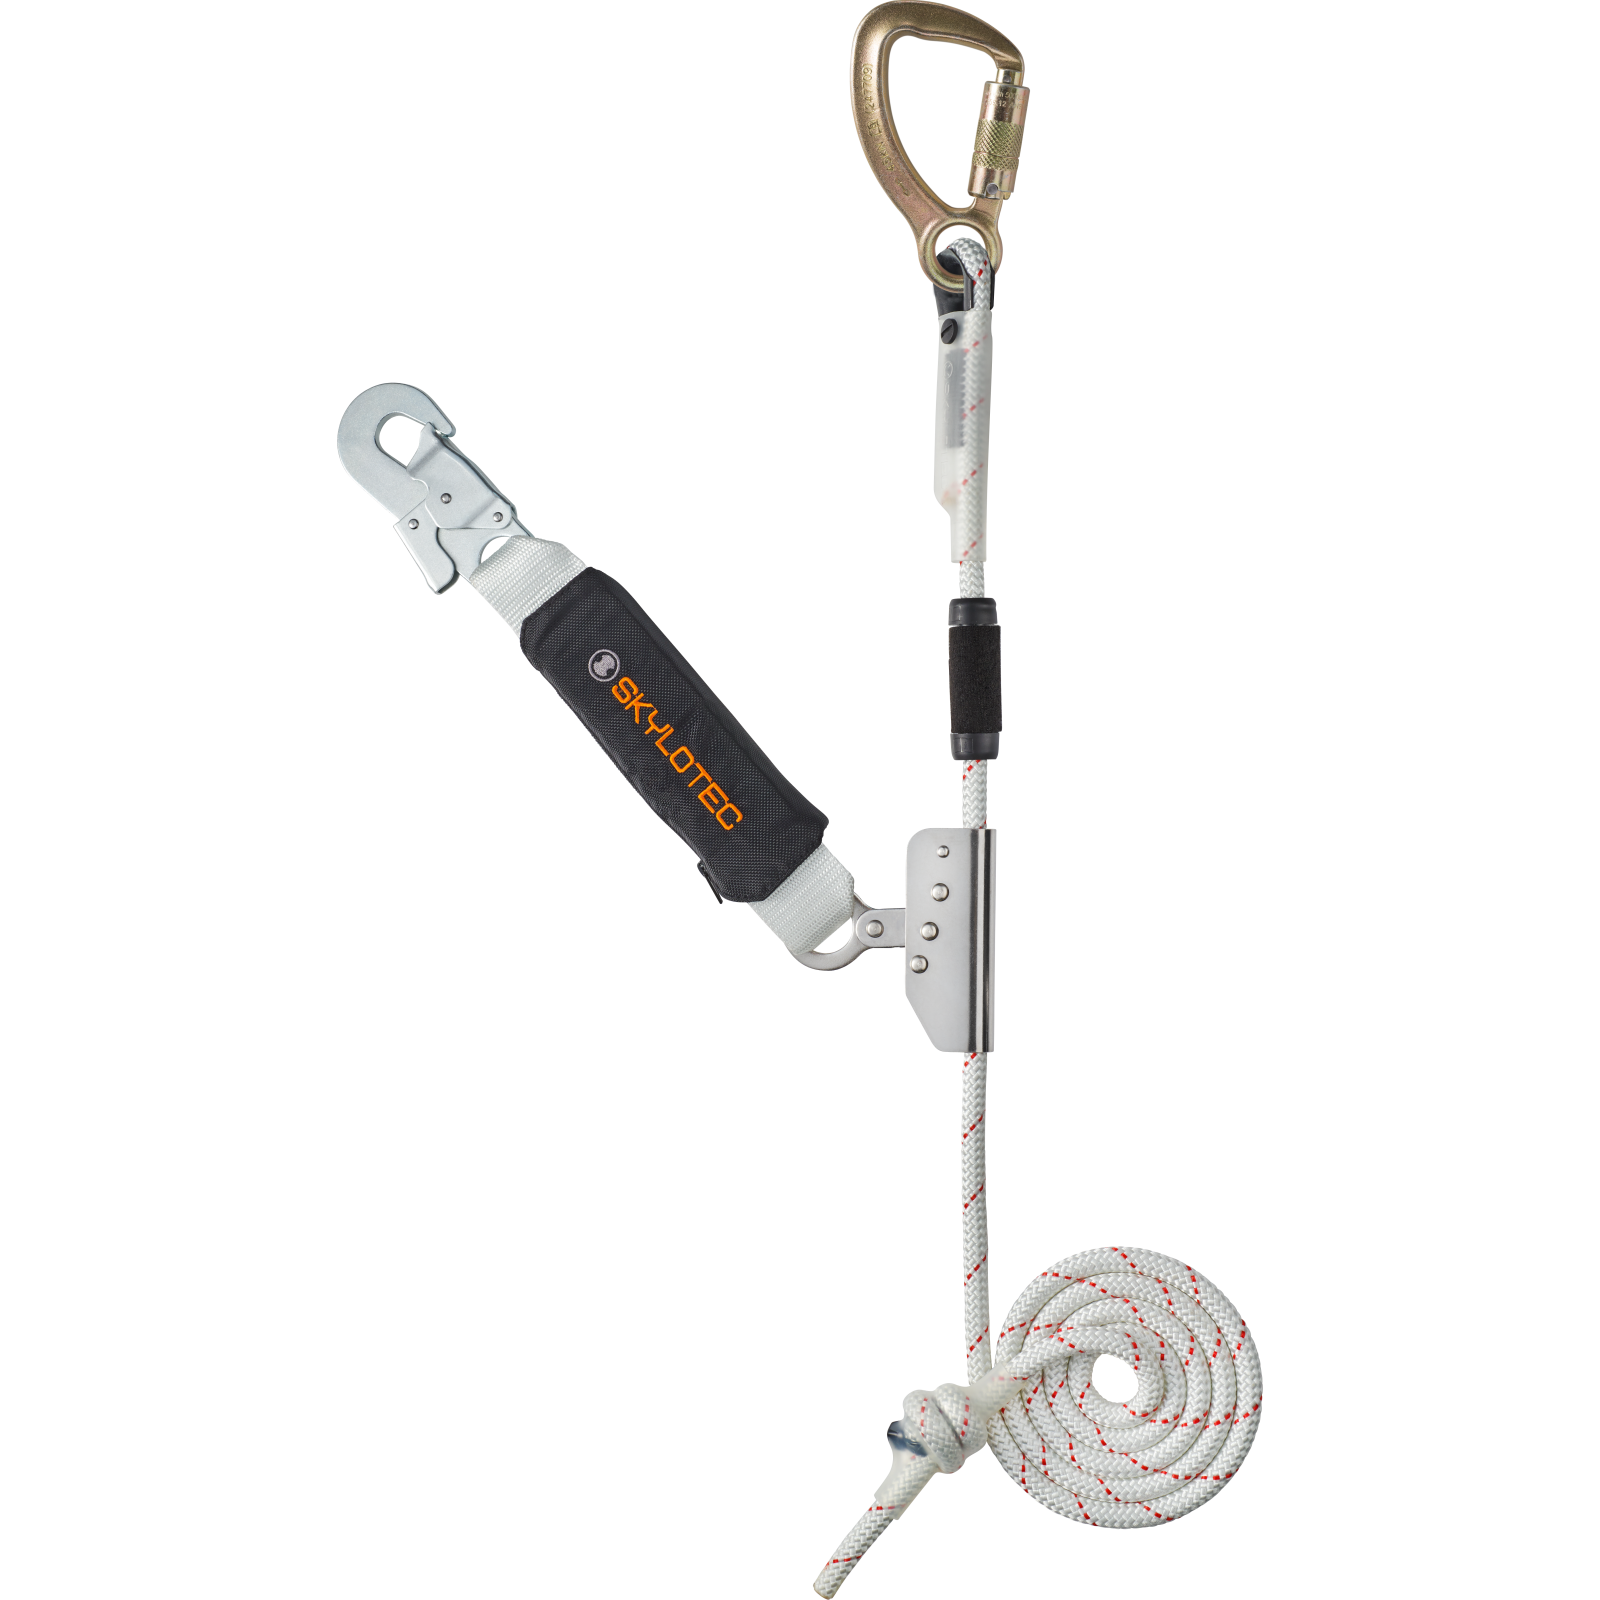 SKN BFD SK11 20m Fall Arrest Device